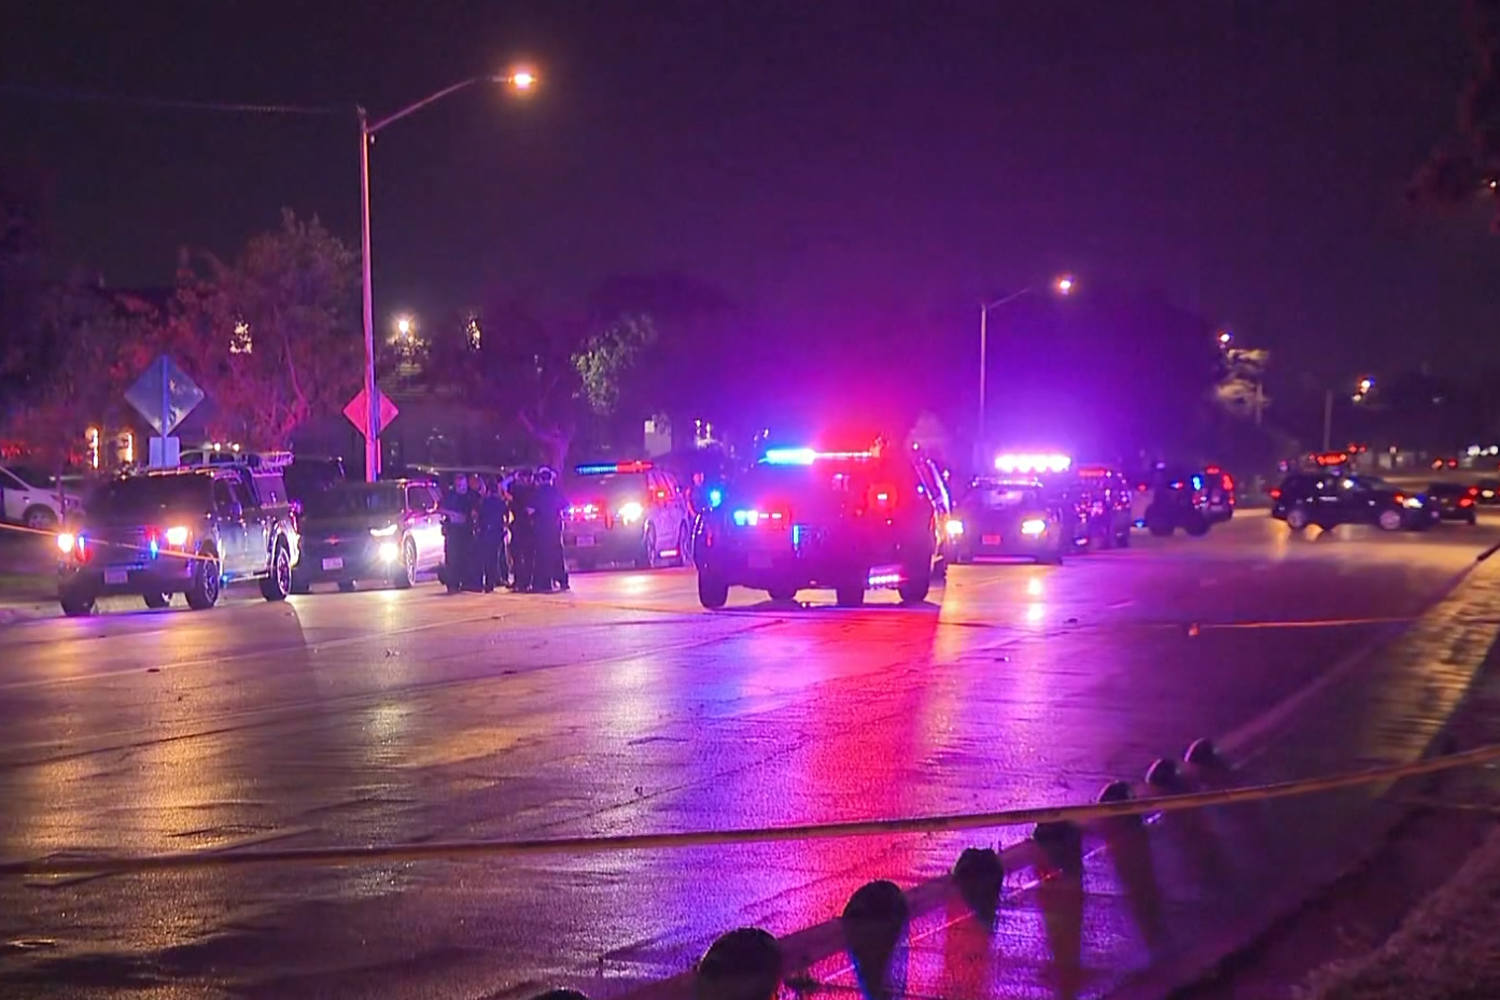 4 children among 6 people wounded in a drive-by shooting in Texas, police say